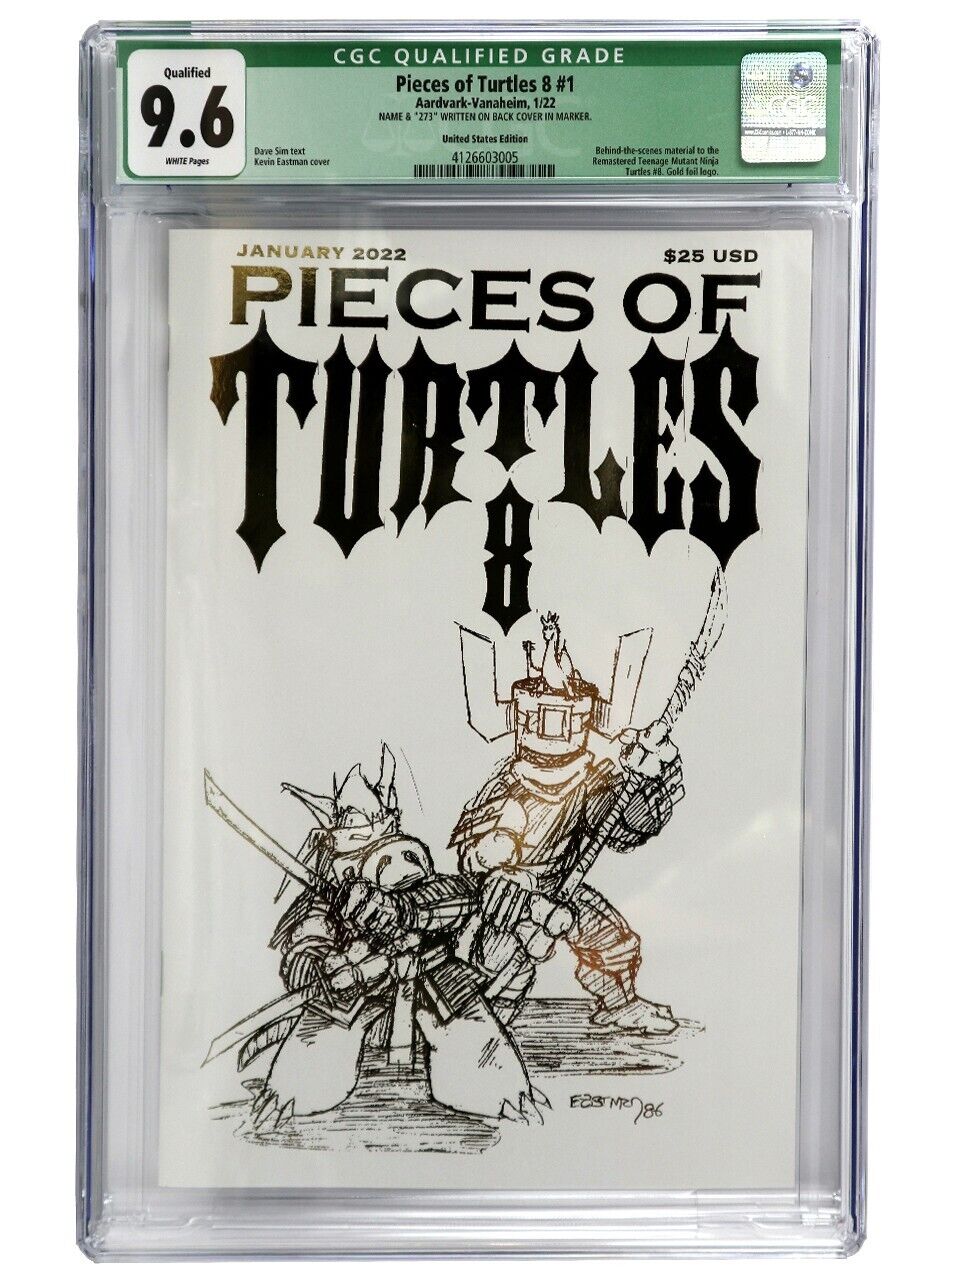 Pieces Of Turtles 8 #1 CGC Graded 9.6 Kickstarter Gold Edition Dave Sim Signed